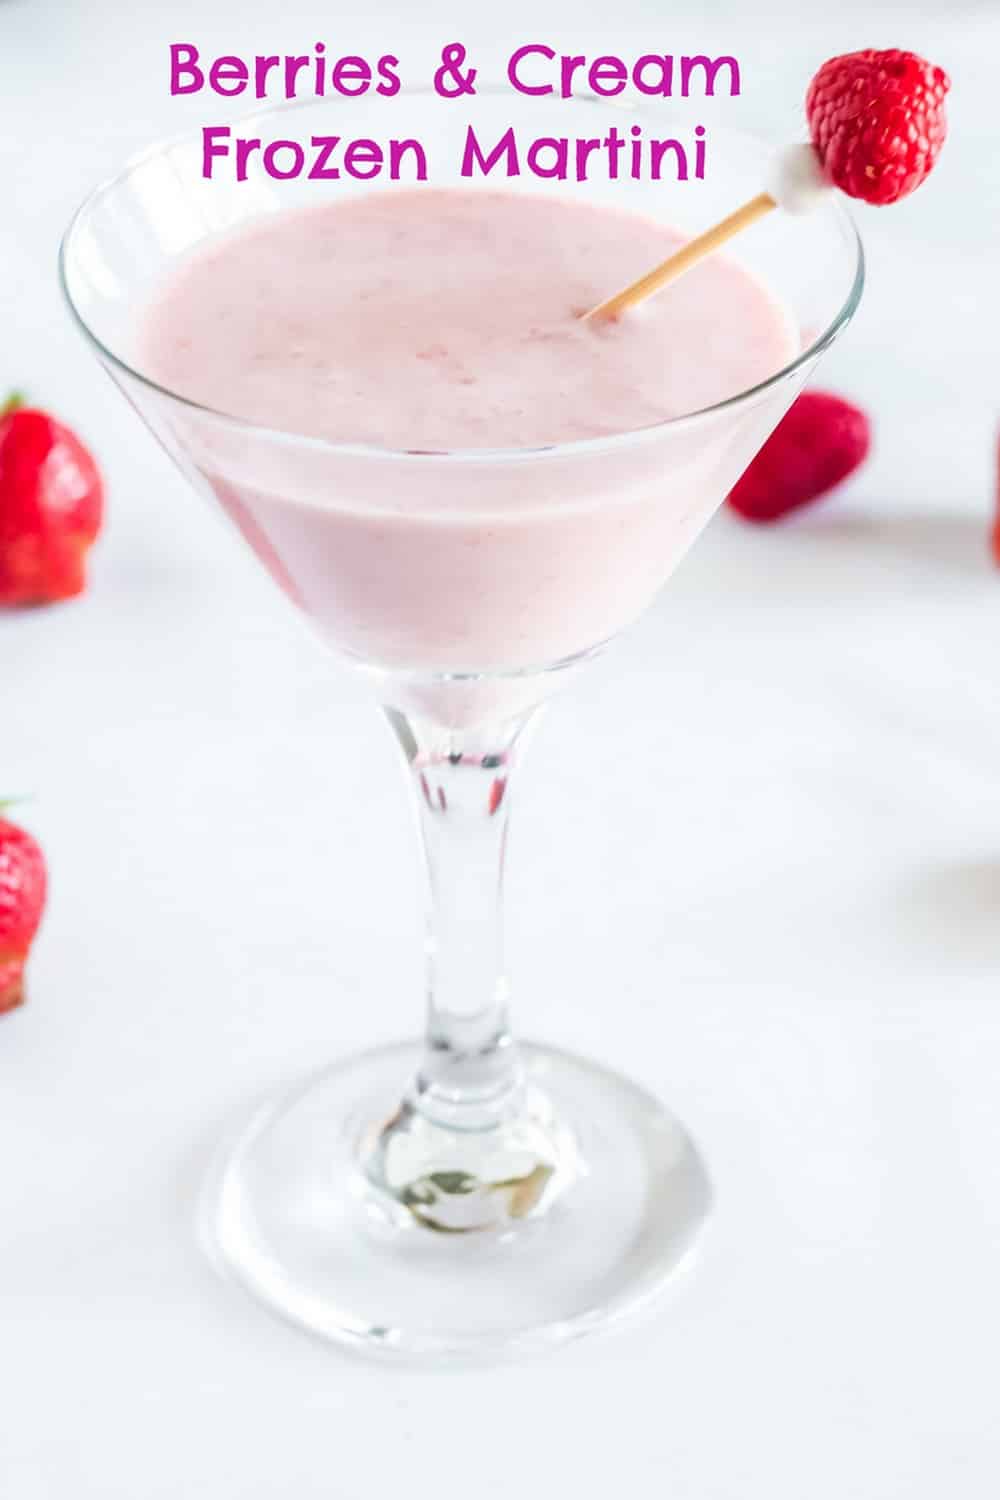 Inspired by the heat, these Berries and Cream Frozen Martinis are the most in-the-moment, sublime, summertime sips, when it comes to the frozen side of cocktails. via @cmpollak1